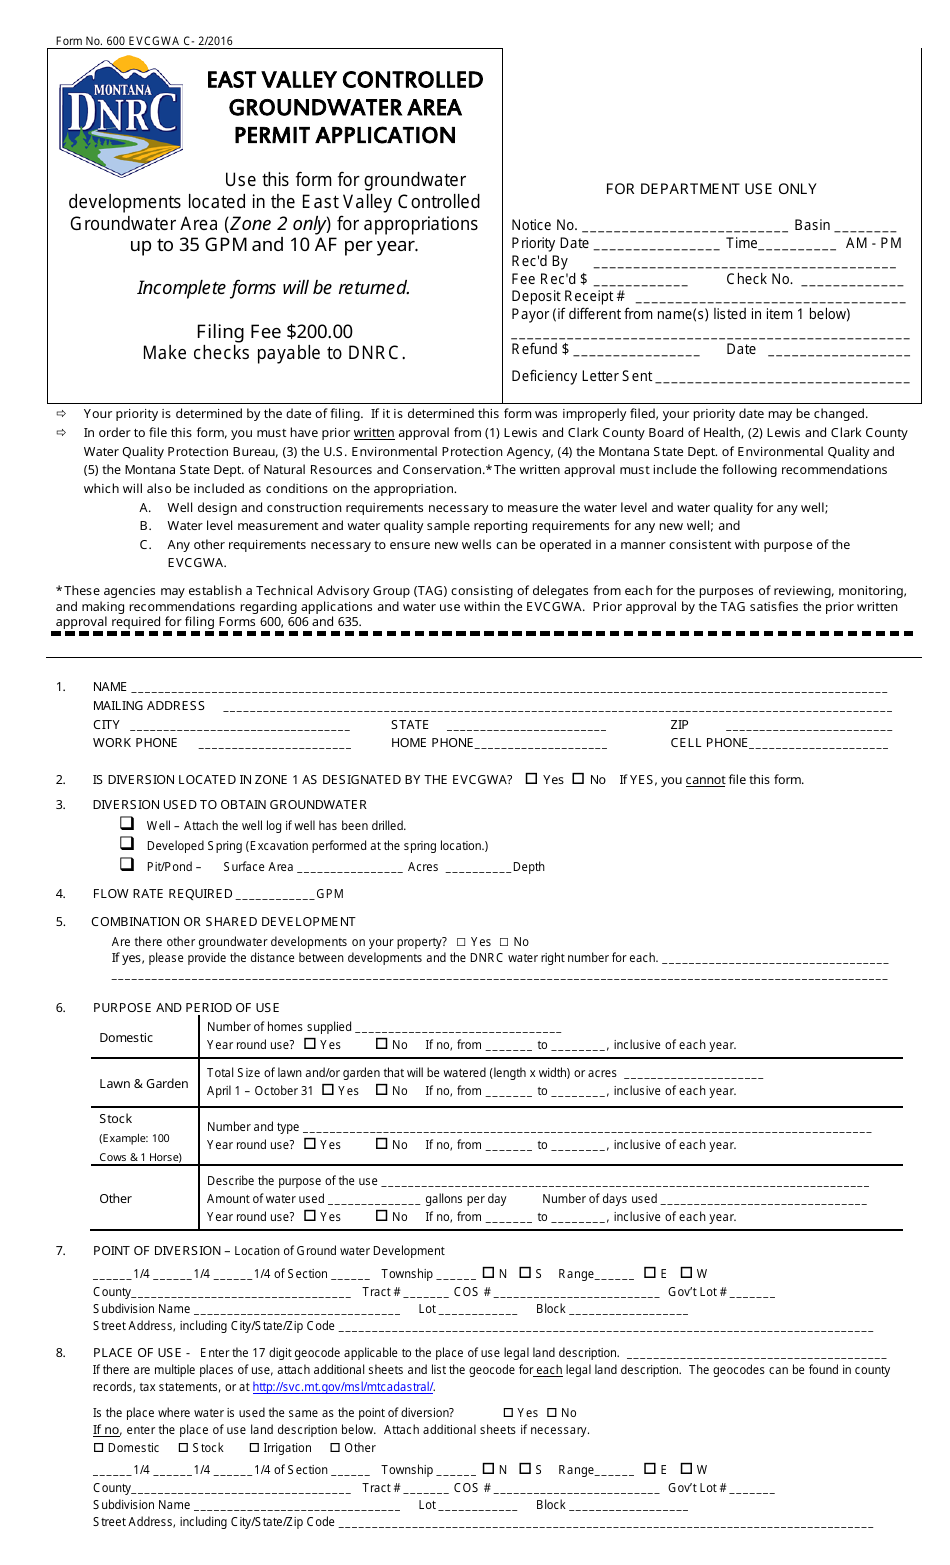 Form 600 EVCGWA East Valley Controlled Groundwater Area Permit Application - Montana, Page 1